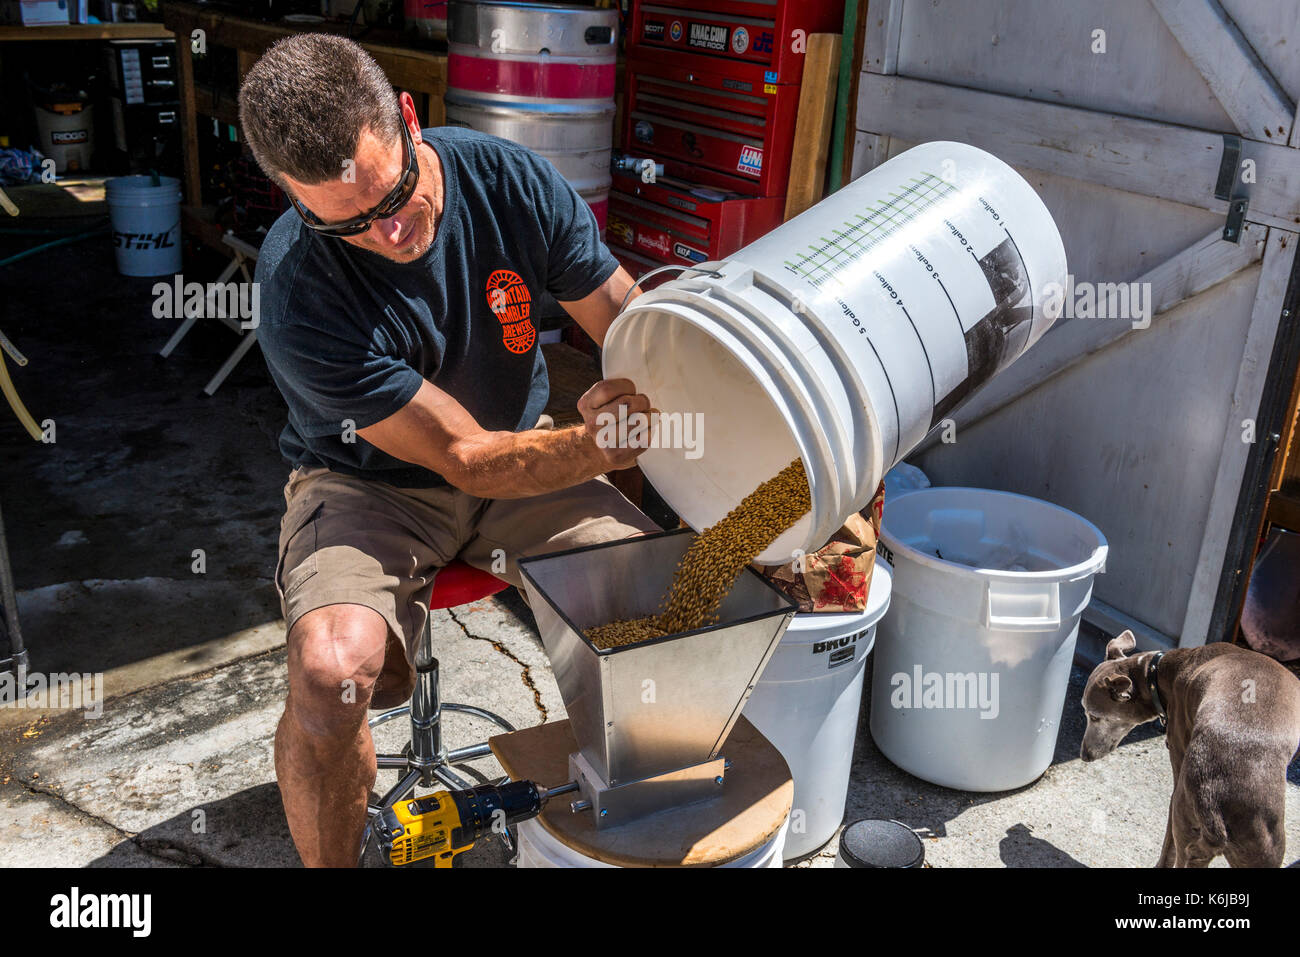 Man pouring beer ingredients into hopper, Bishop, California, USA Stock Photo